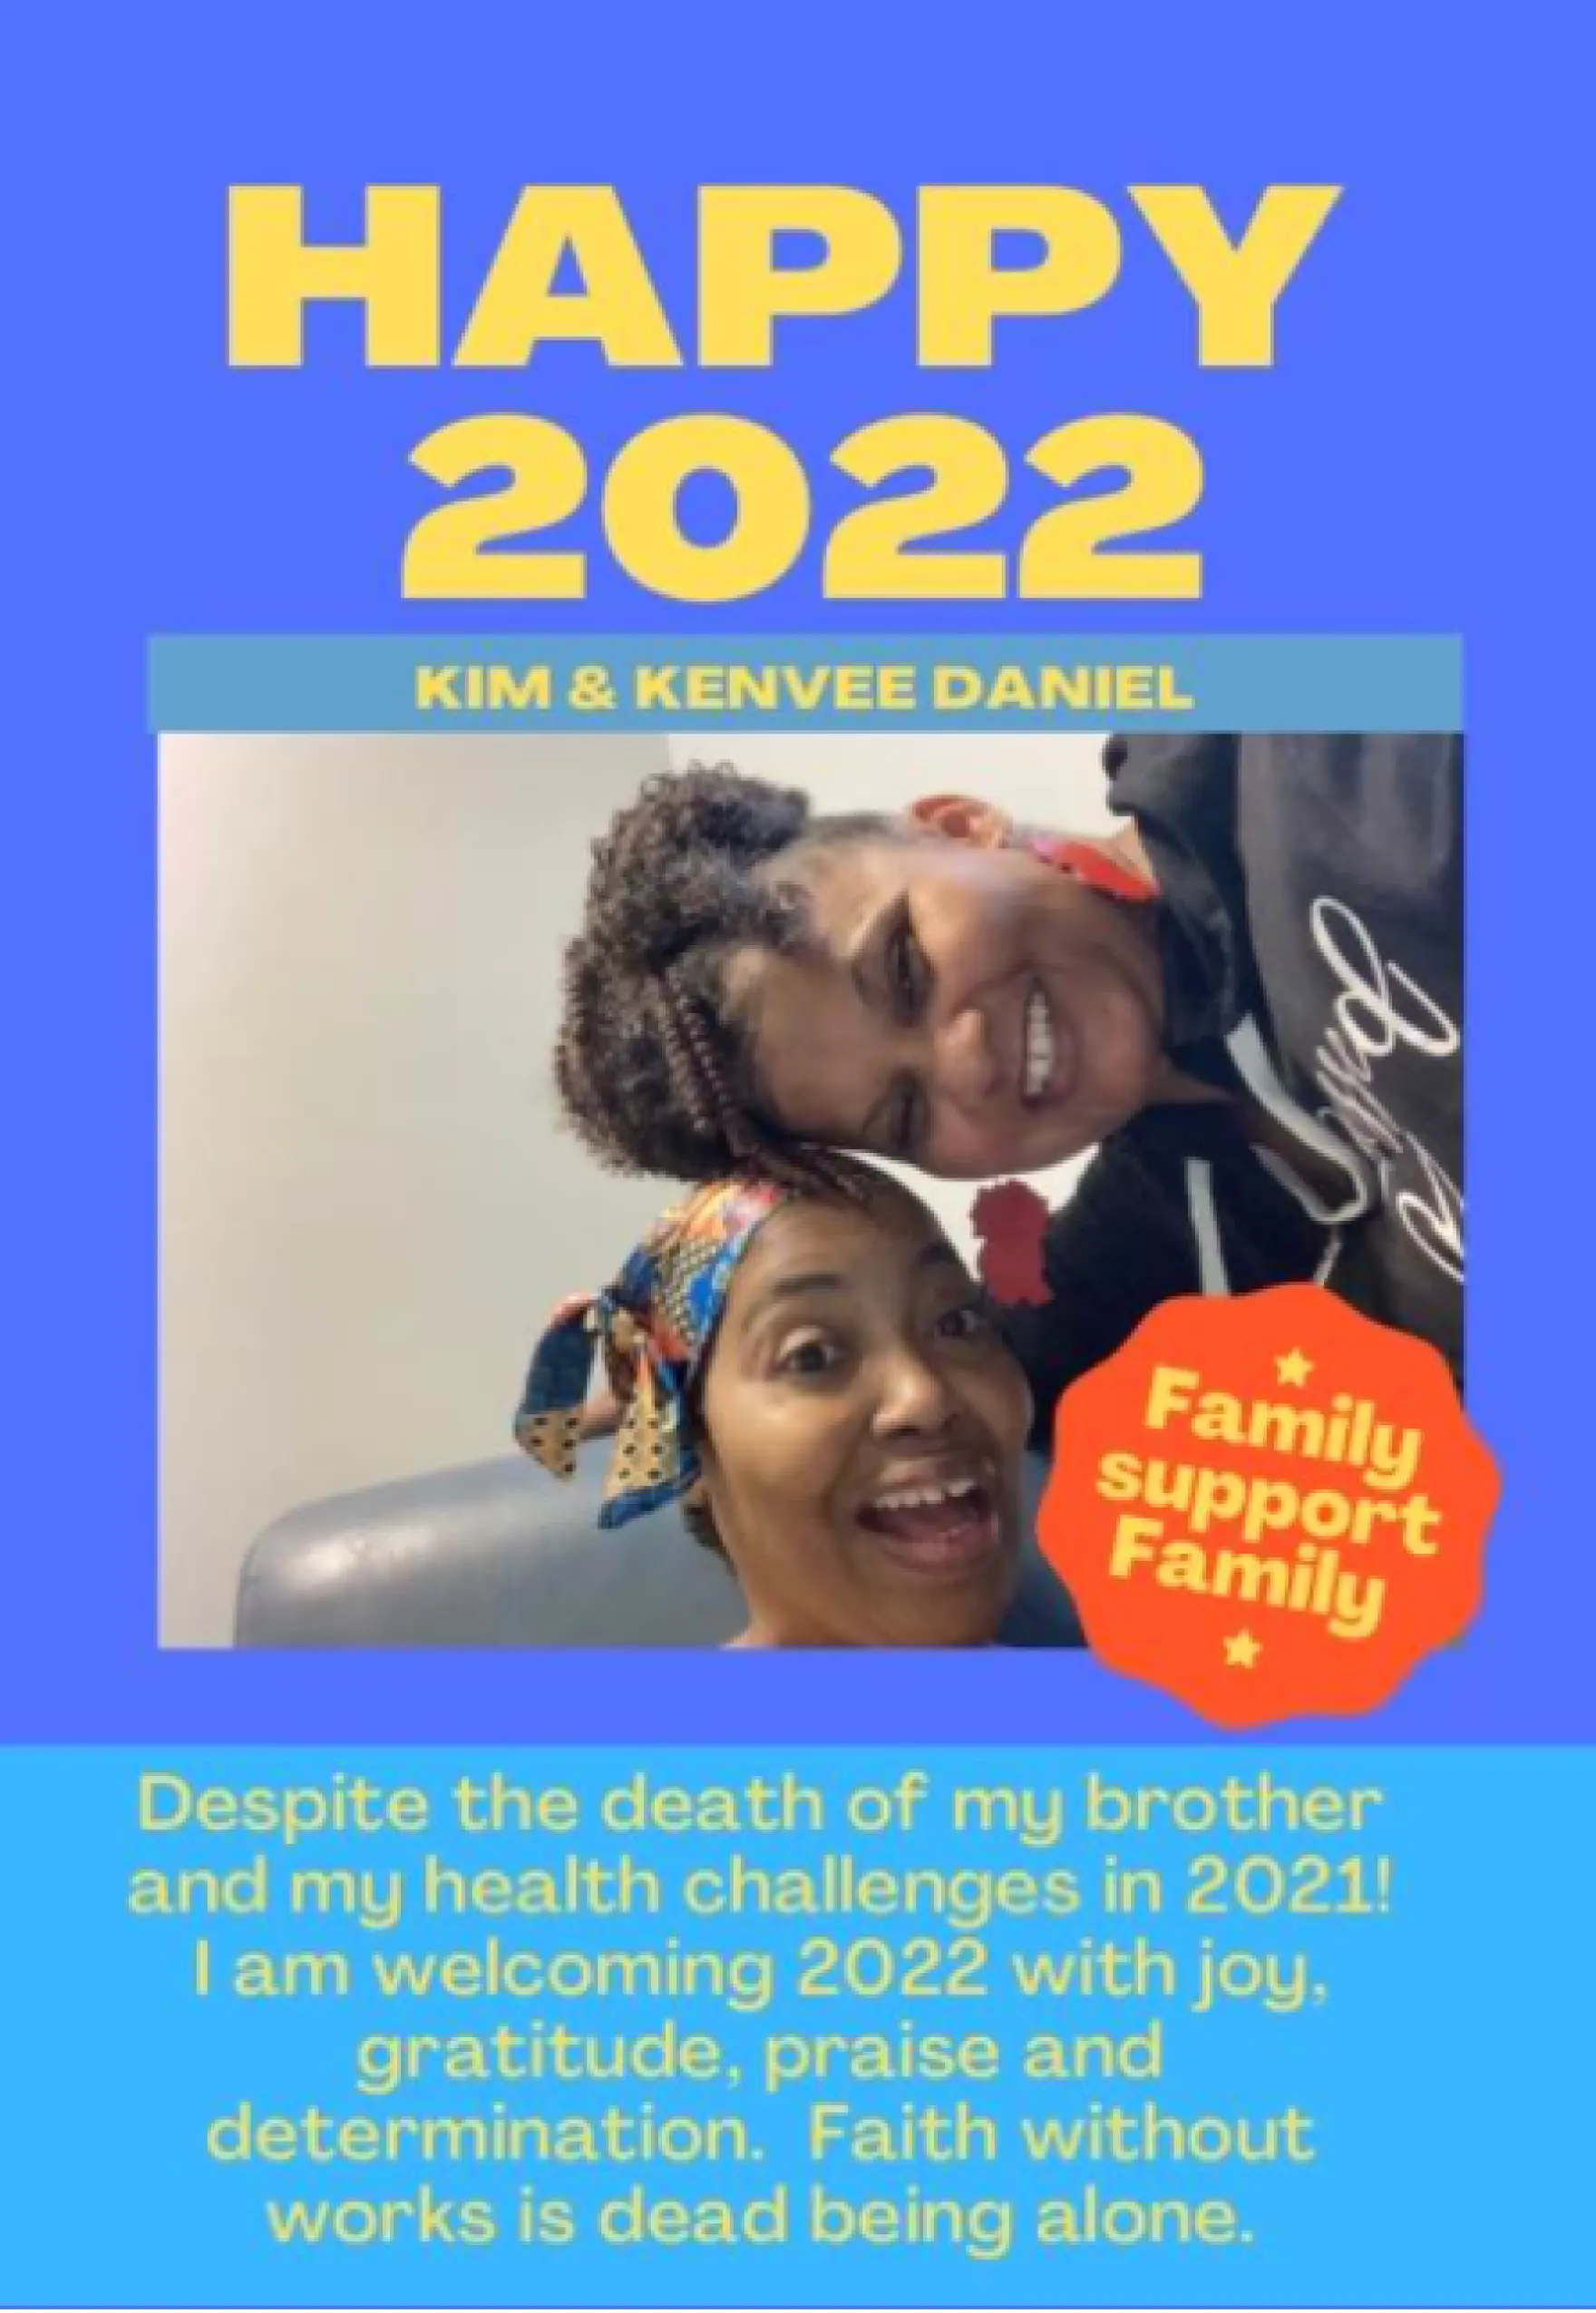 A Happy 2022 poster showing Kim Daniels and her sister. Below it reads: "Despite the death of my brother and my health challenges in 2021! I am welcoming 2022 with joy, gratitude, praise and determination. Faith without works is dead being alone."